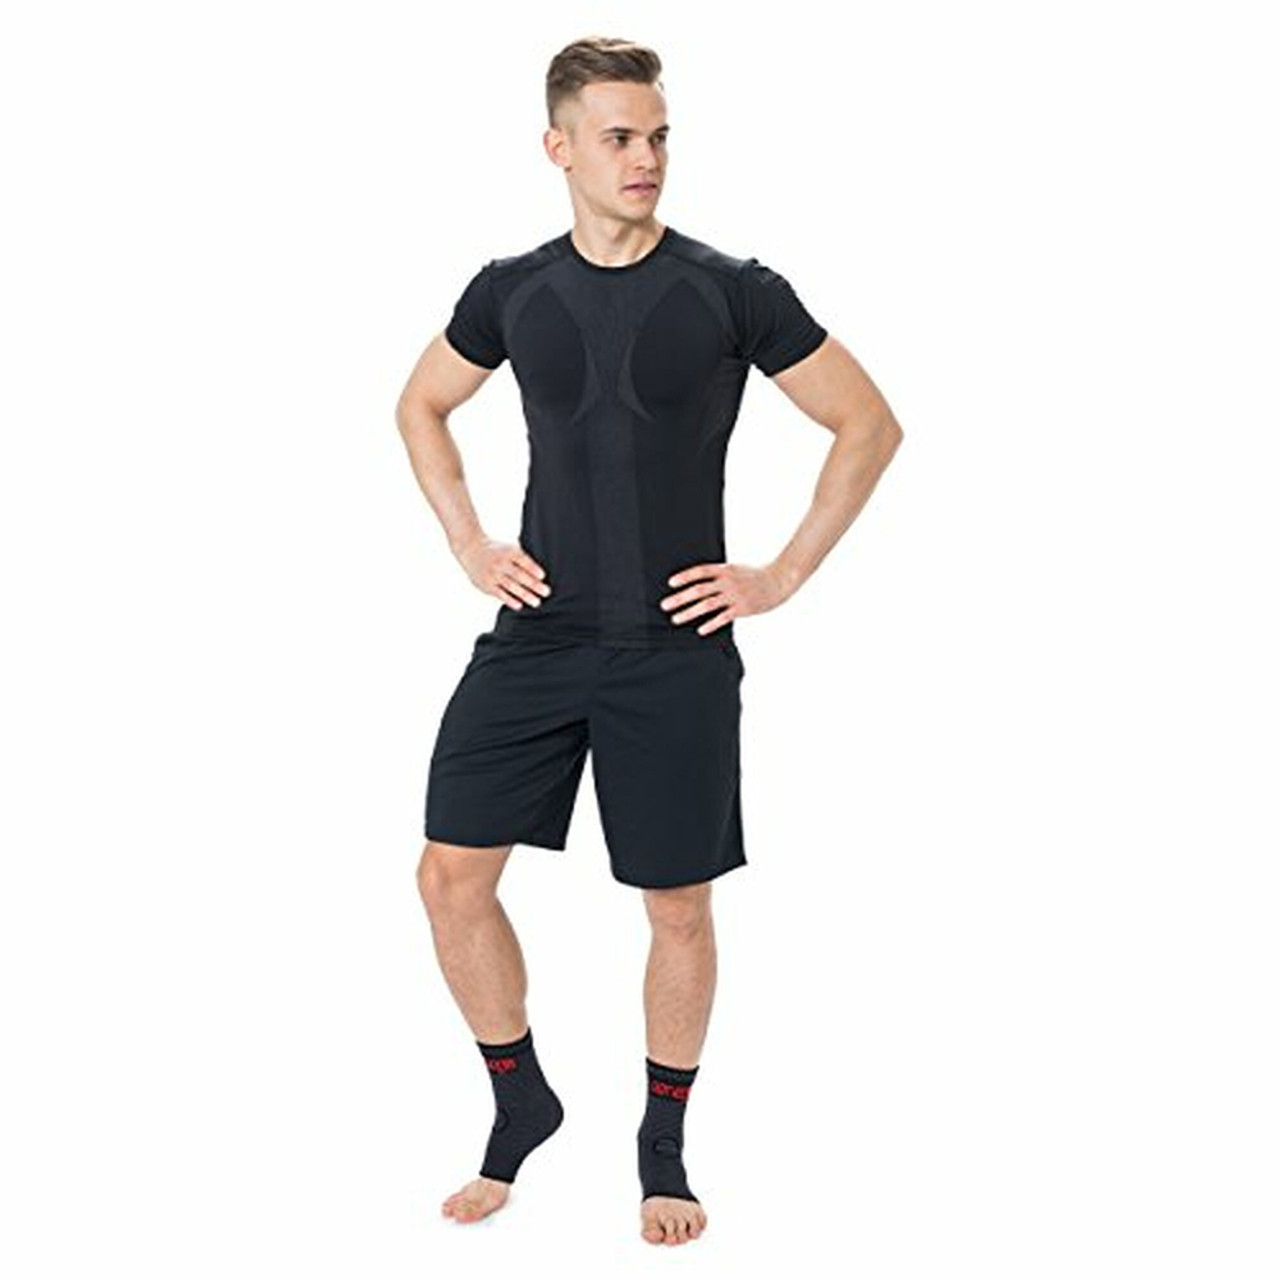 Breathable Ankle Brace and Compression Ankle Sleeve product image